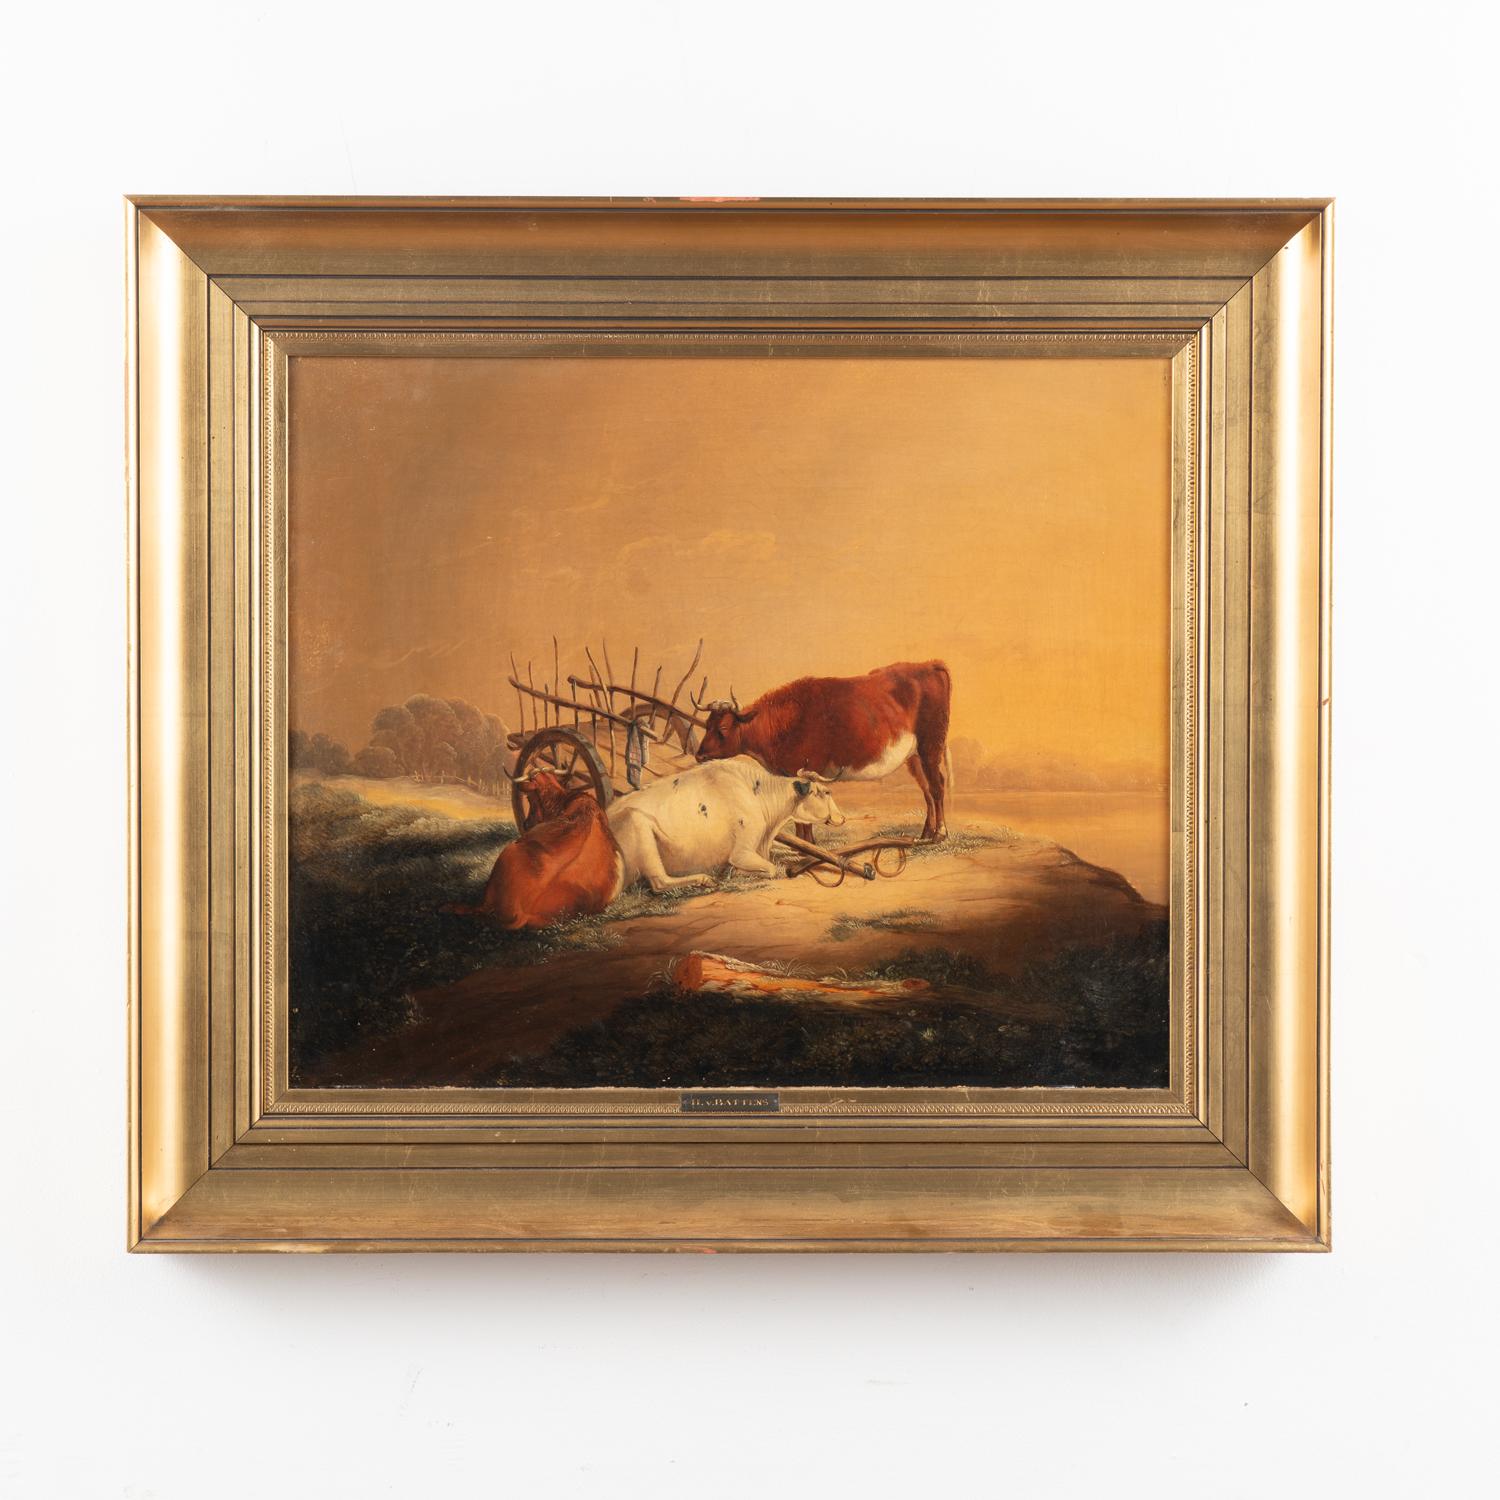 Original oil on canvas landscape painting of three cows laying beside cart and yoke. The golden glow creates the feeling of dusk approaching.
Artist attributed to H.V. Battens
Canvas in original age related condition with craquelure throughout,